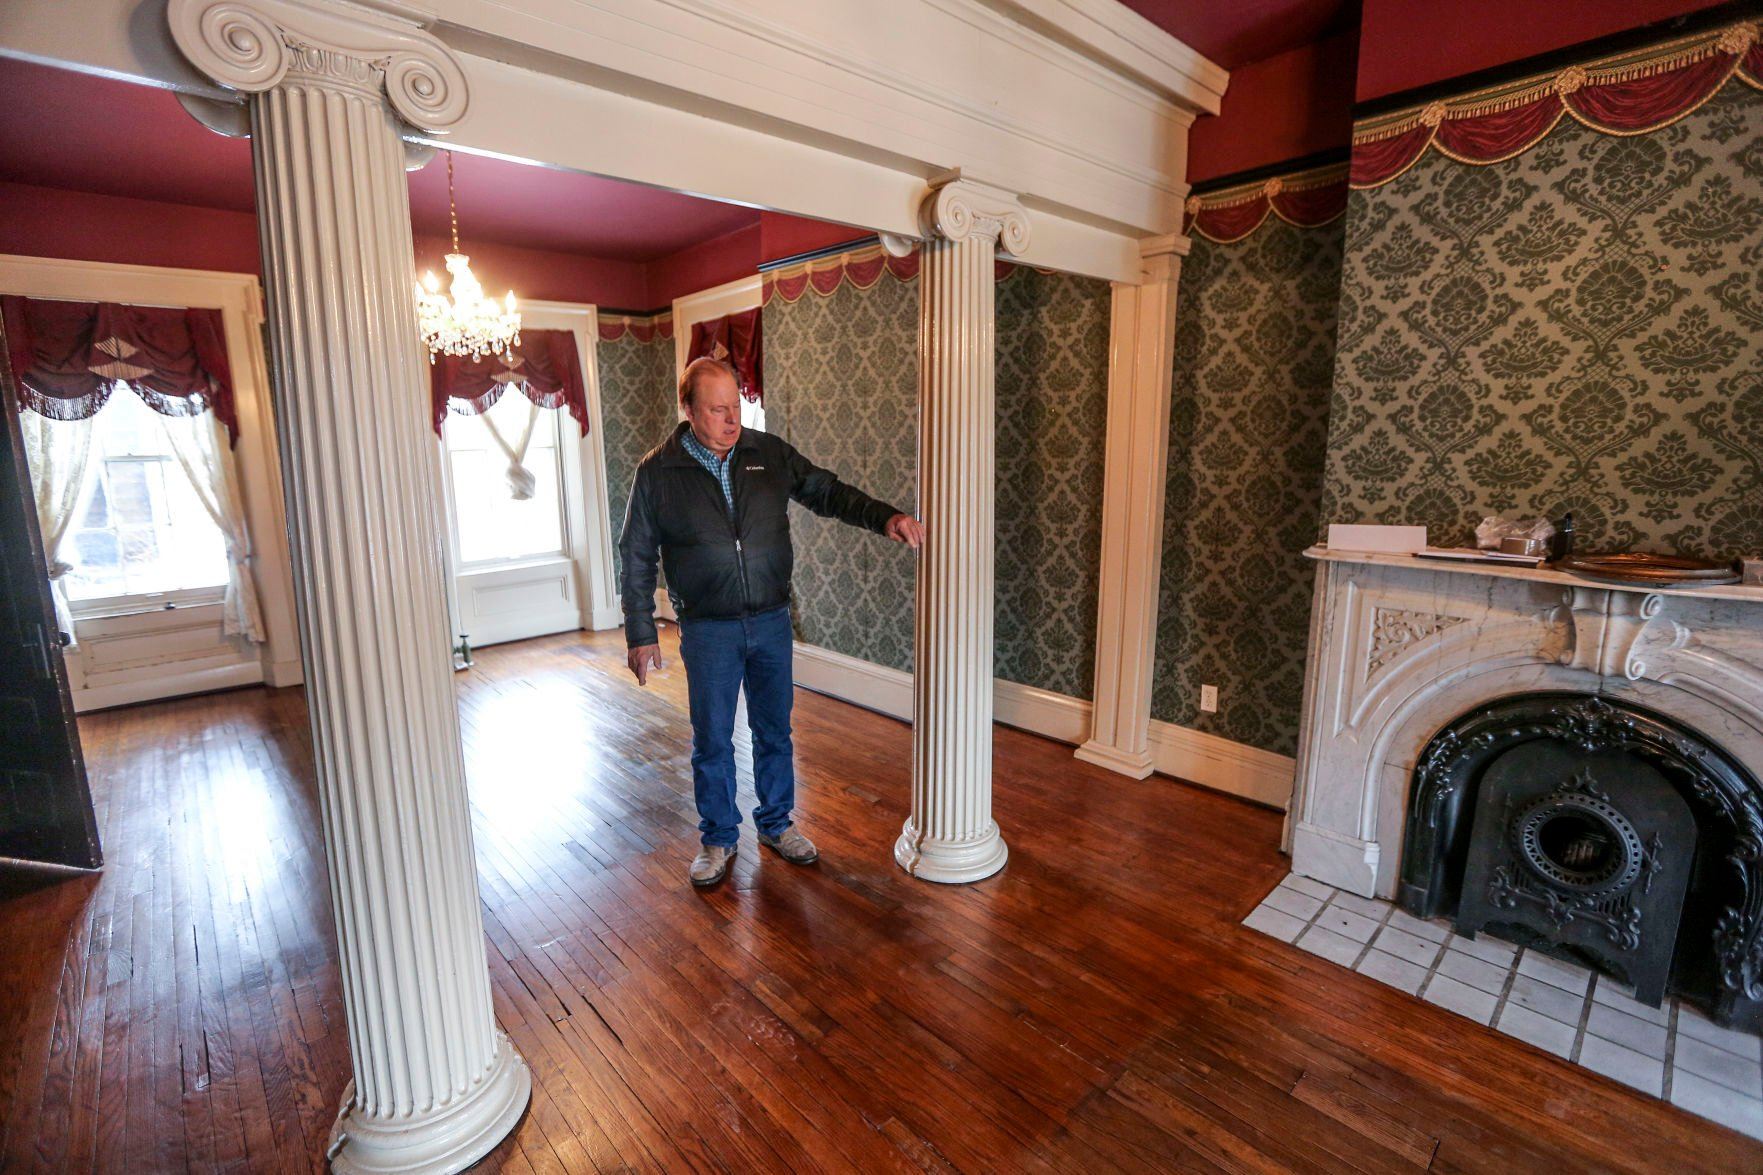 Galena, Ill., resident Jim Ryndak is working to refurbish the property at 1004 Park Ave. in the city that housed Annie Wiggins Guest House bed-and-breakfast. Once the renovations are complete, Ryndak will open an inn named The Mansion on Park Avenue this spring.    PHOTO CREDIT: Dave Kettering